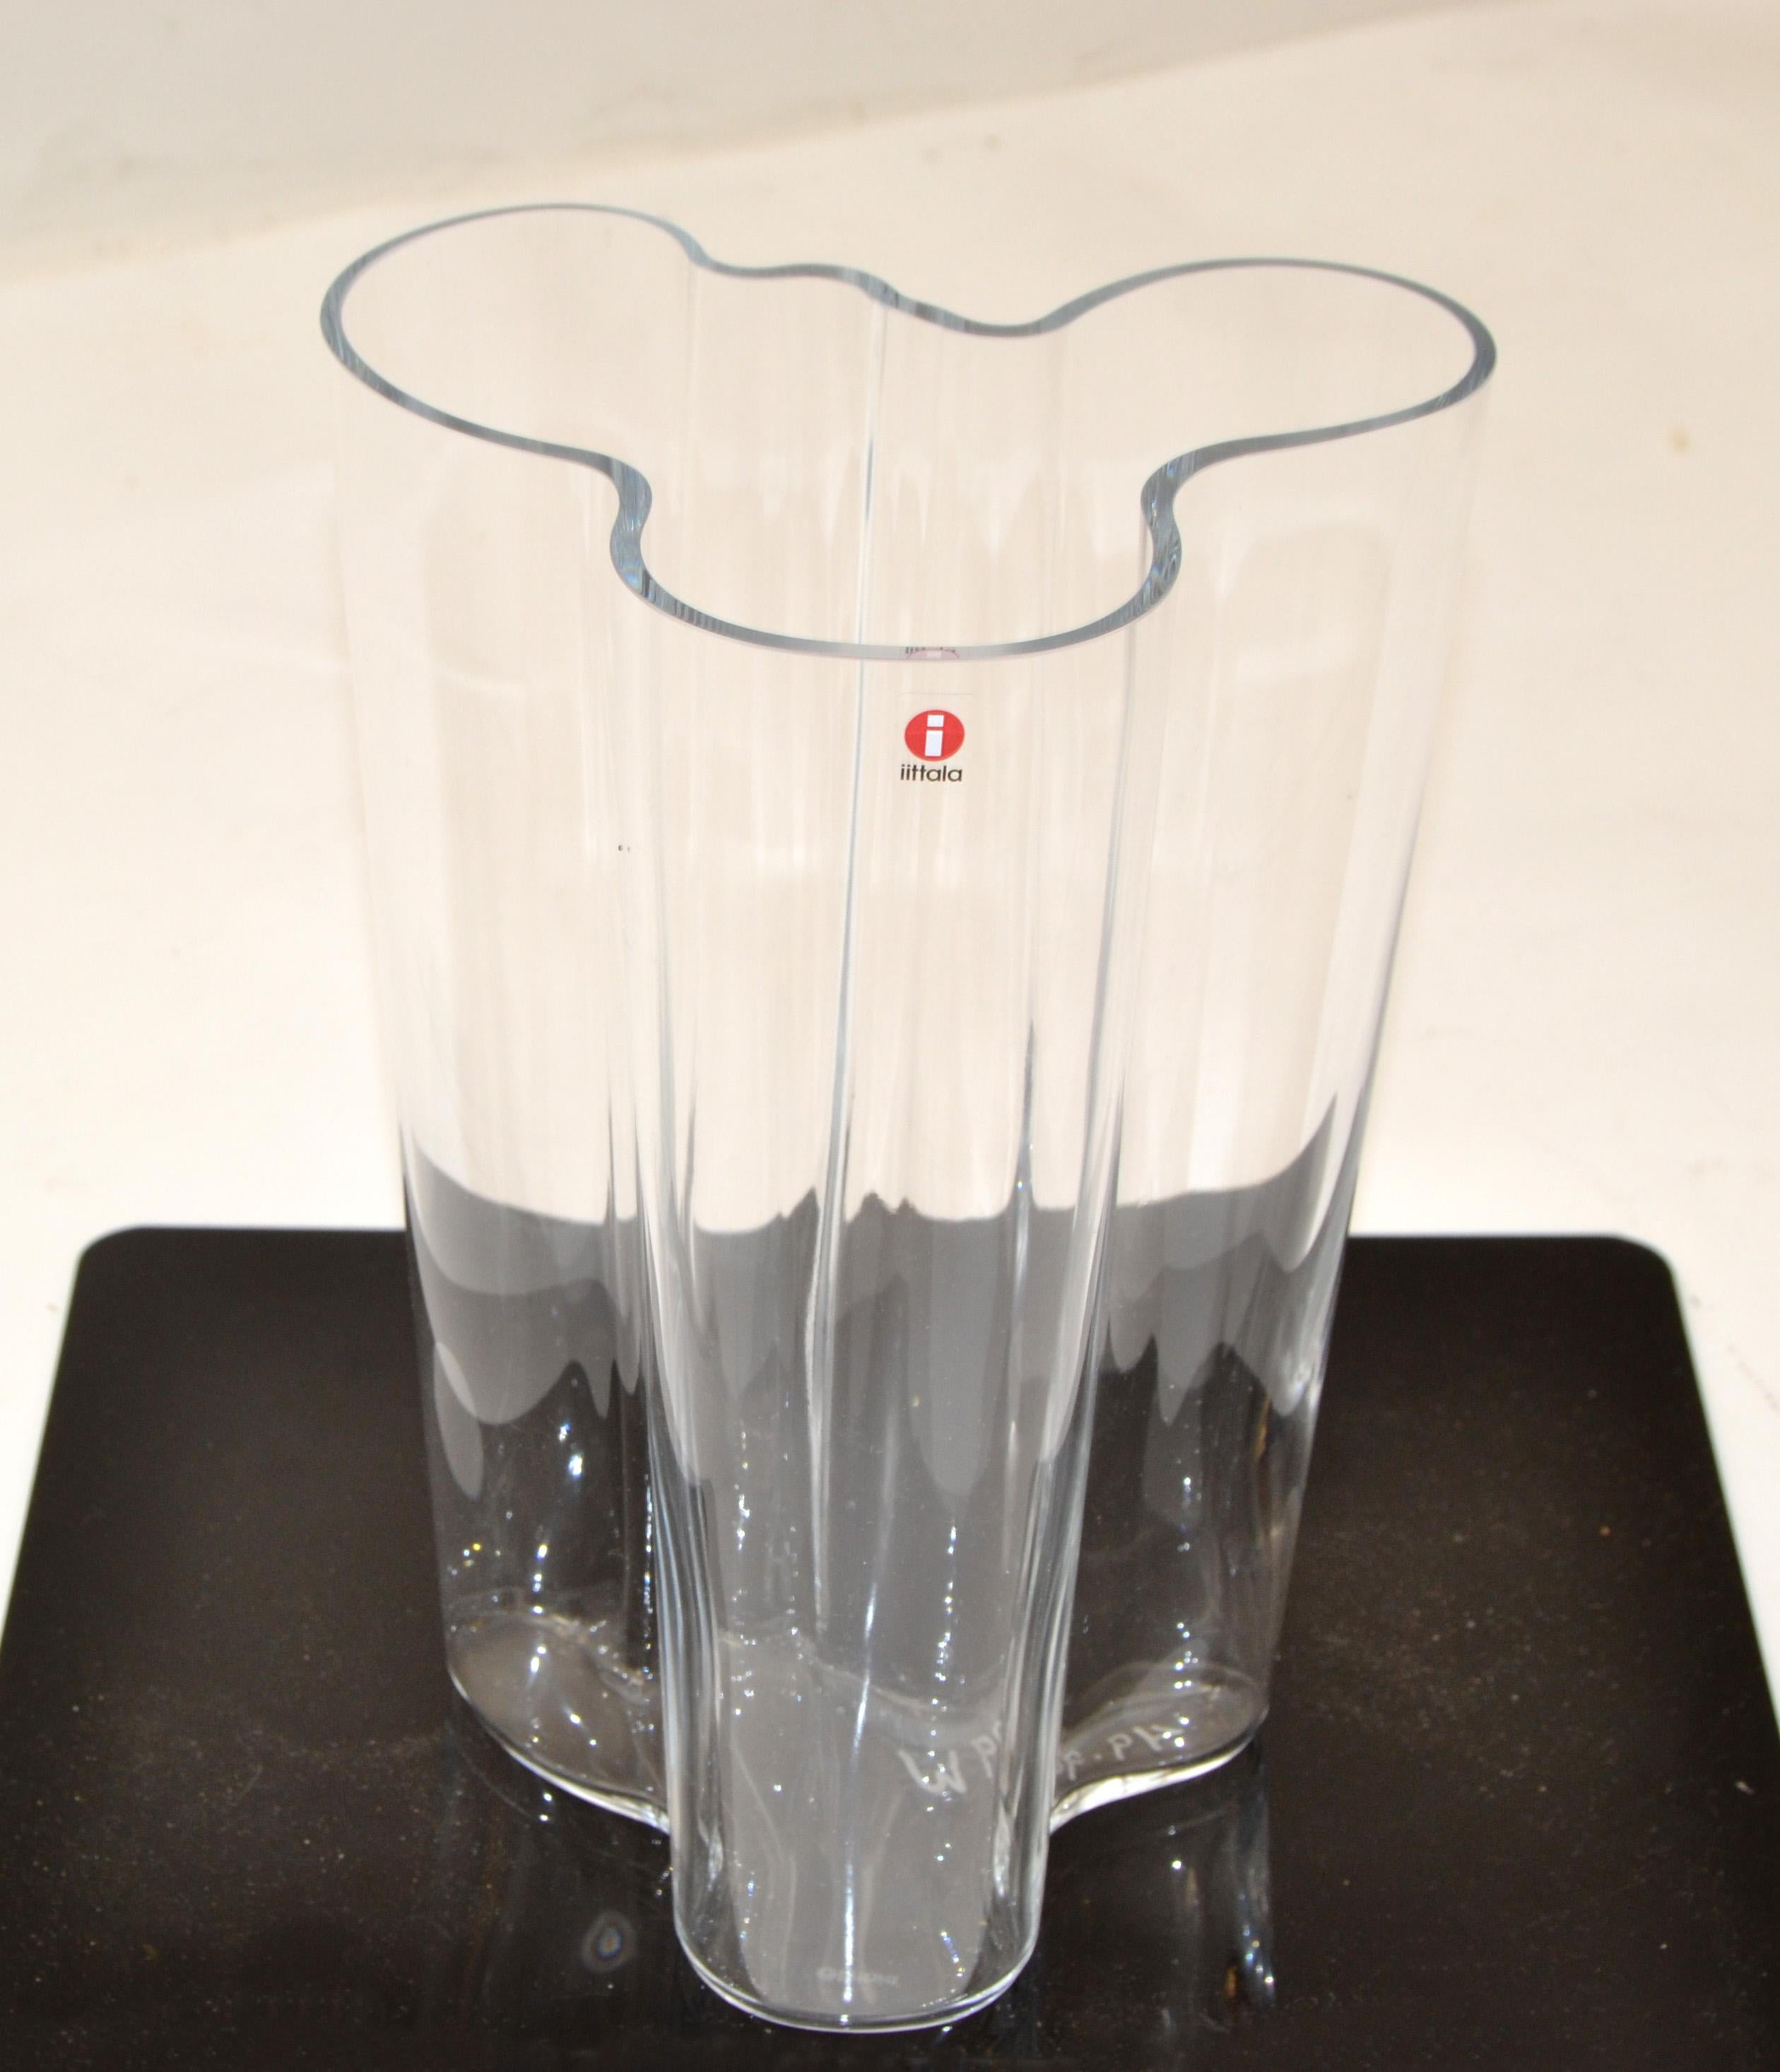 Scandinavian Modern sculptural Arango clear art glass savoy vase designed by Alvar Aalto for Iittala, made in Finland. 
This is a beautiful handmade iconic piece from the 1990s.
Foil label is attached to the vase.
Comes with the Original Box.